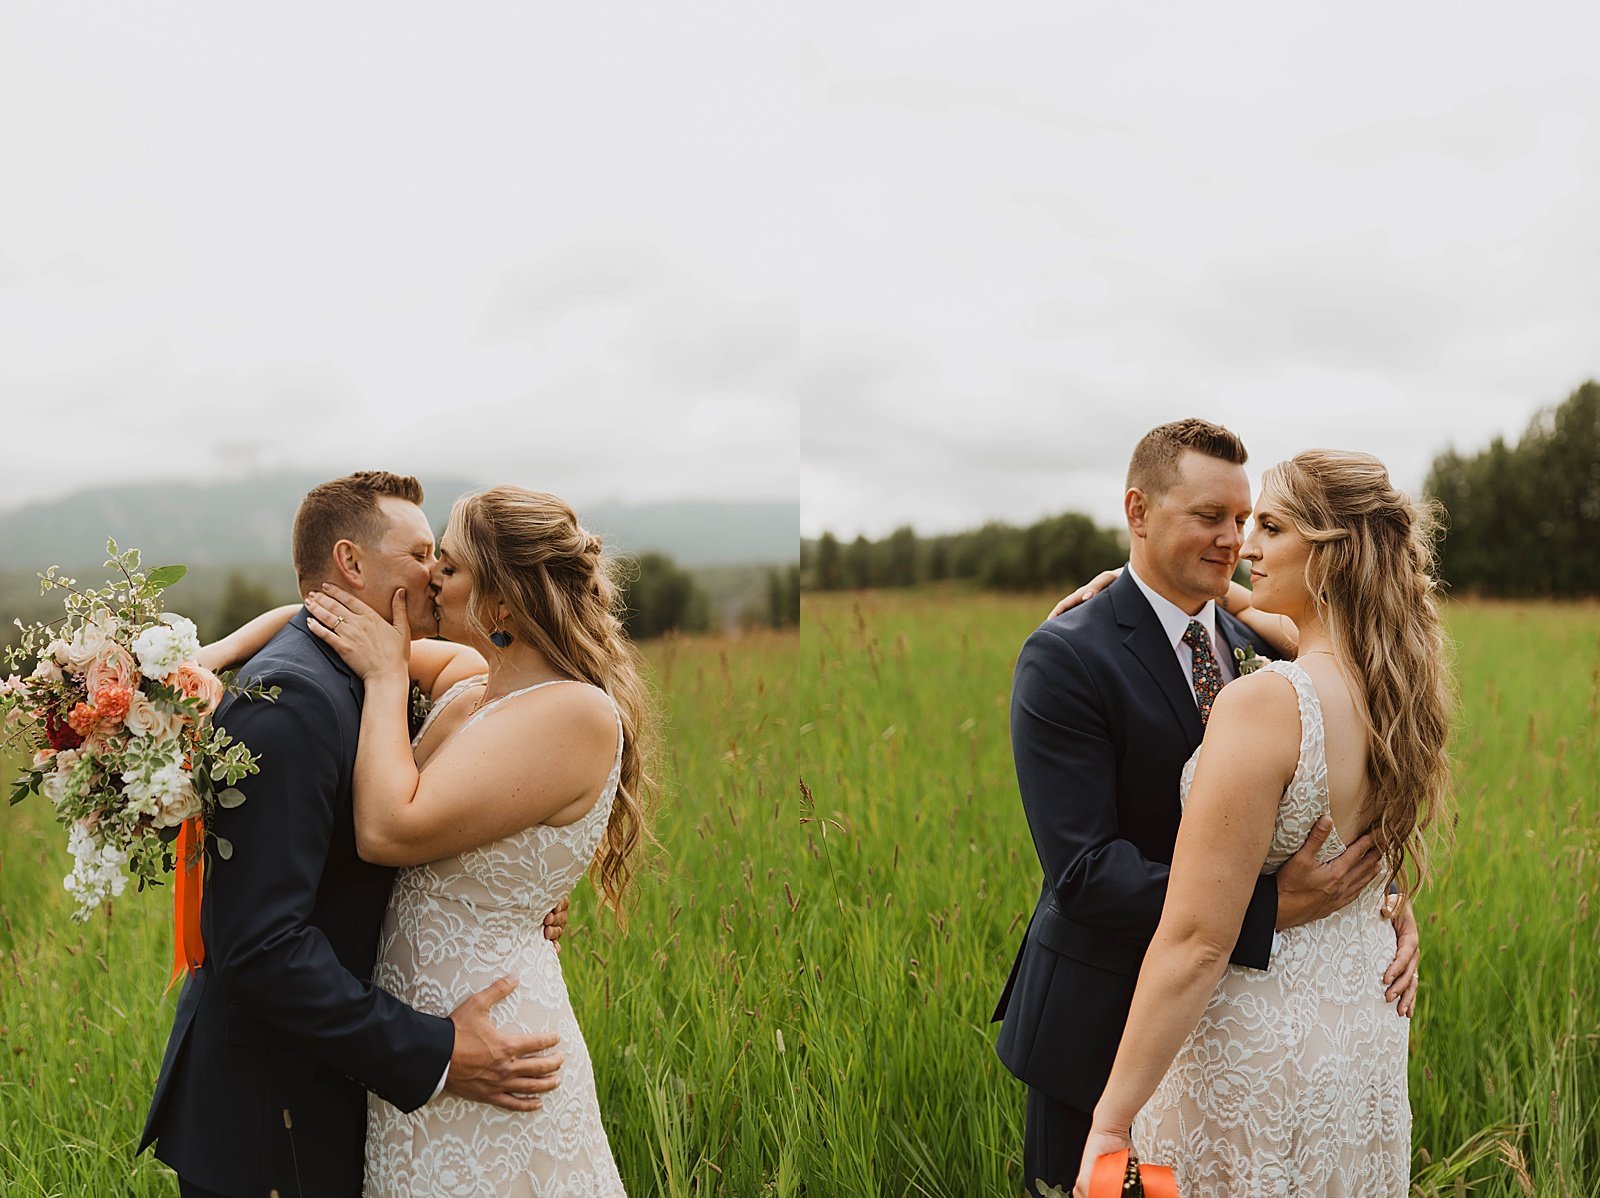  Bride and groom kissing in a field with the Alaska mountains in the background.  